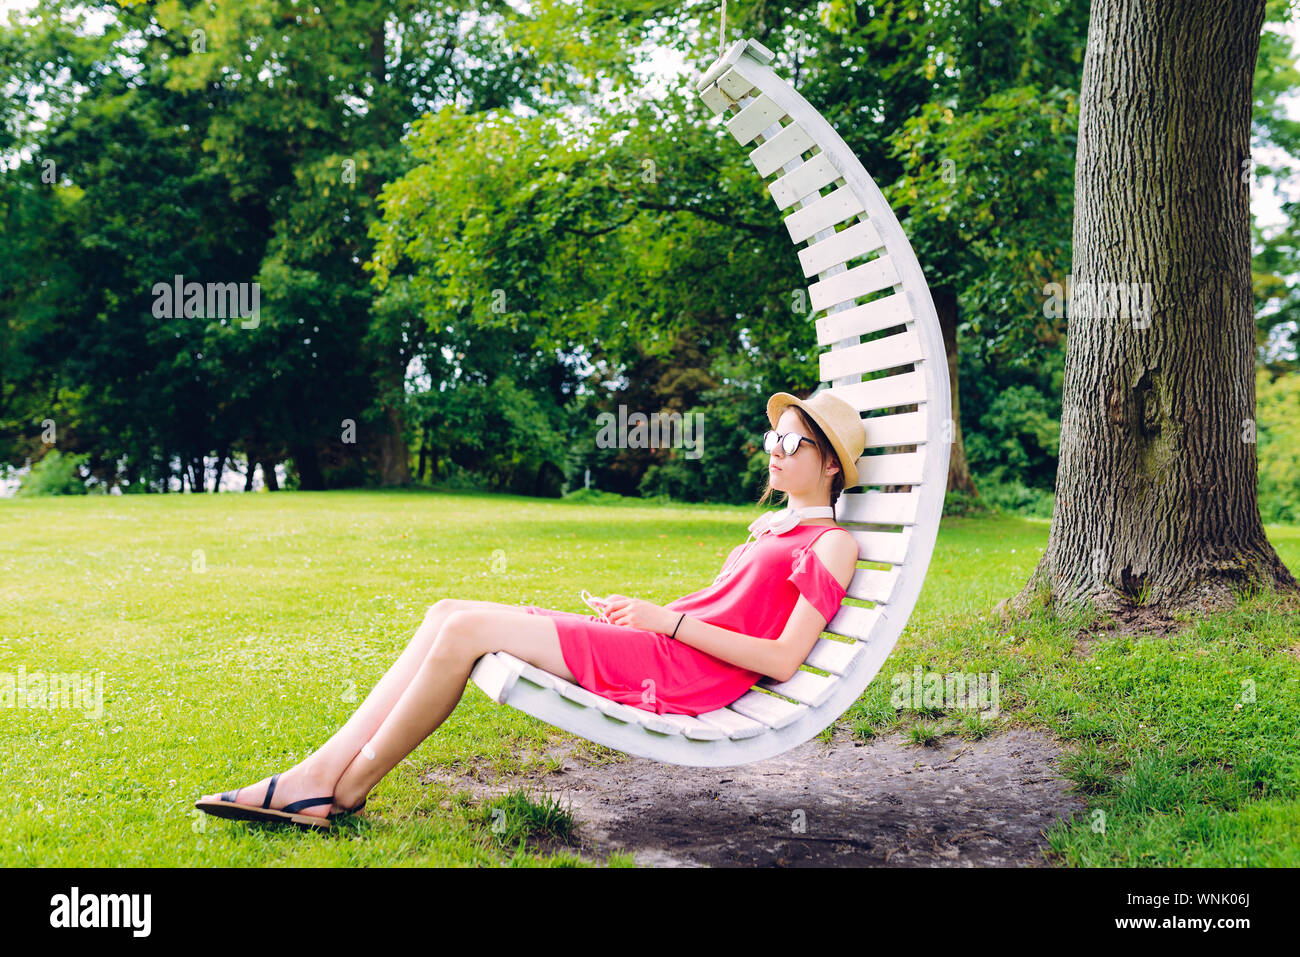 young girl resting on a hanging wooden chair in the garden Stock Photo